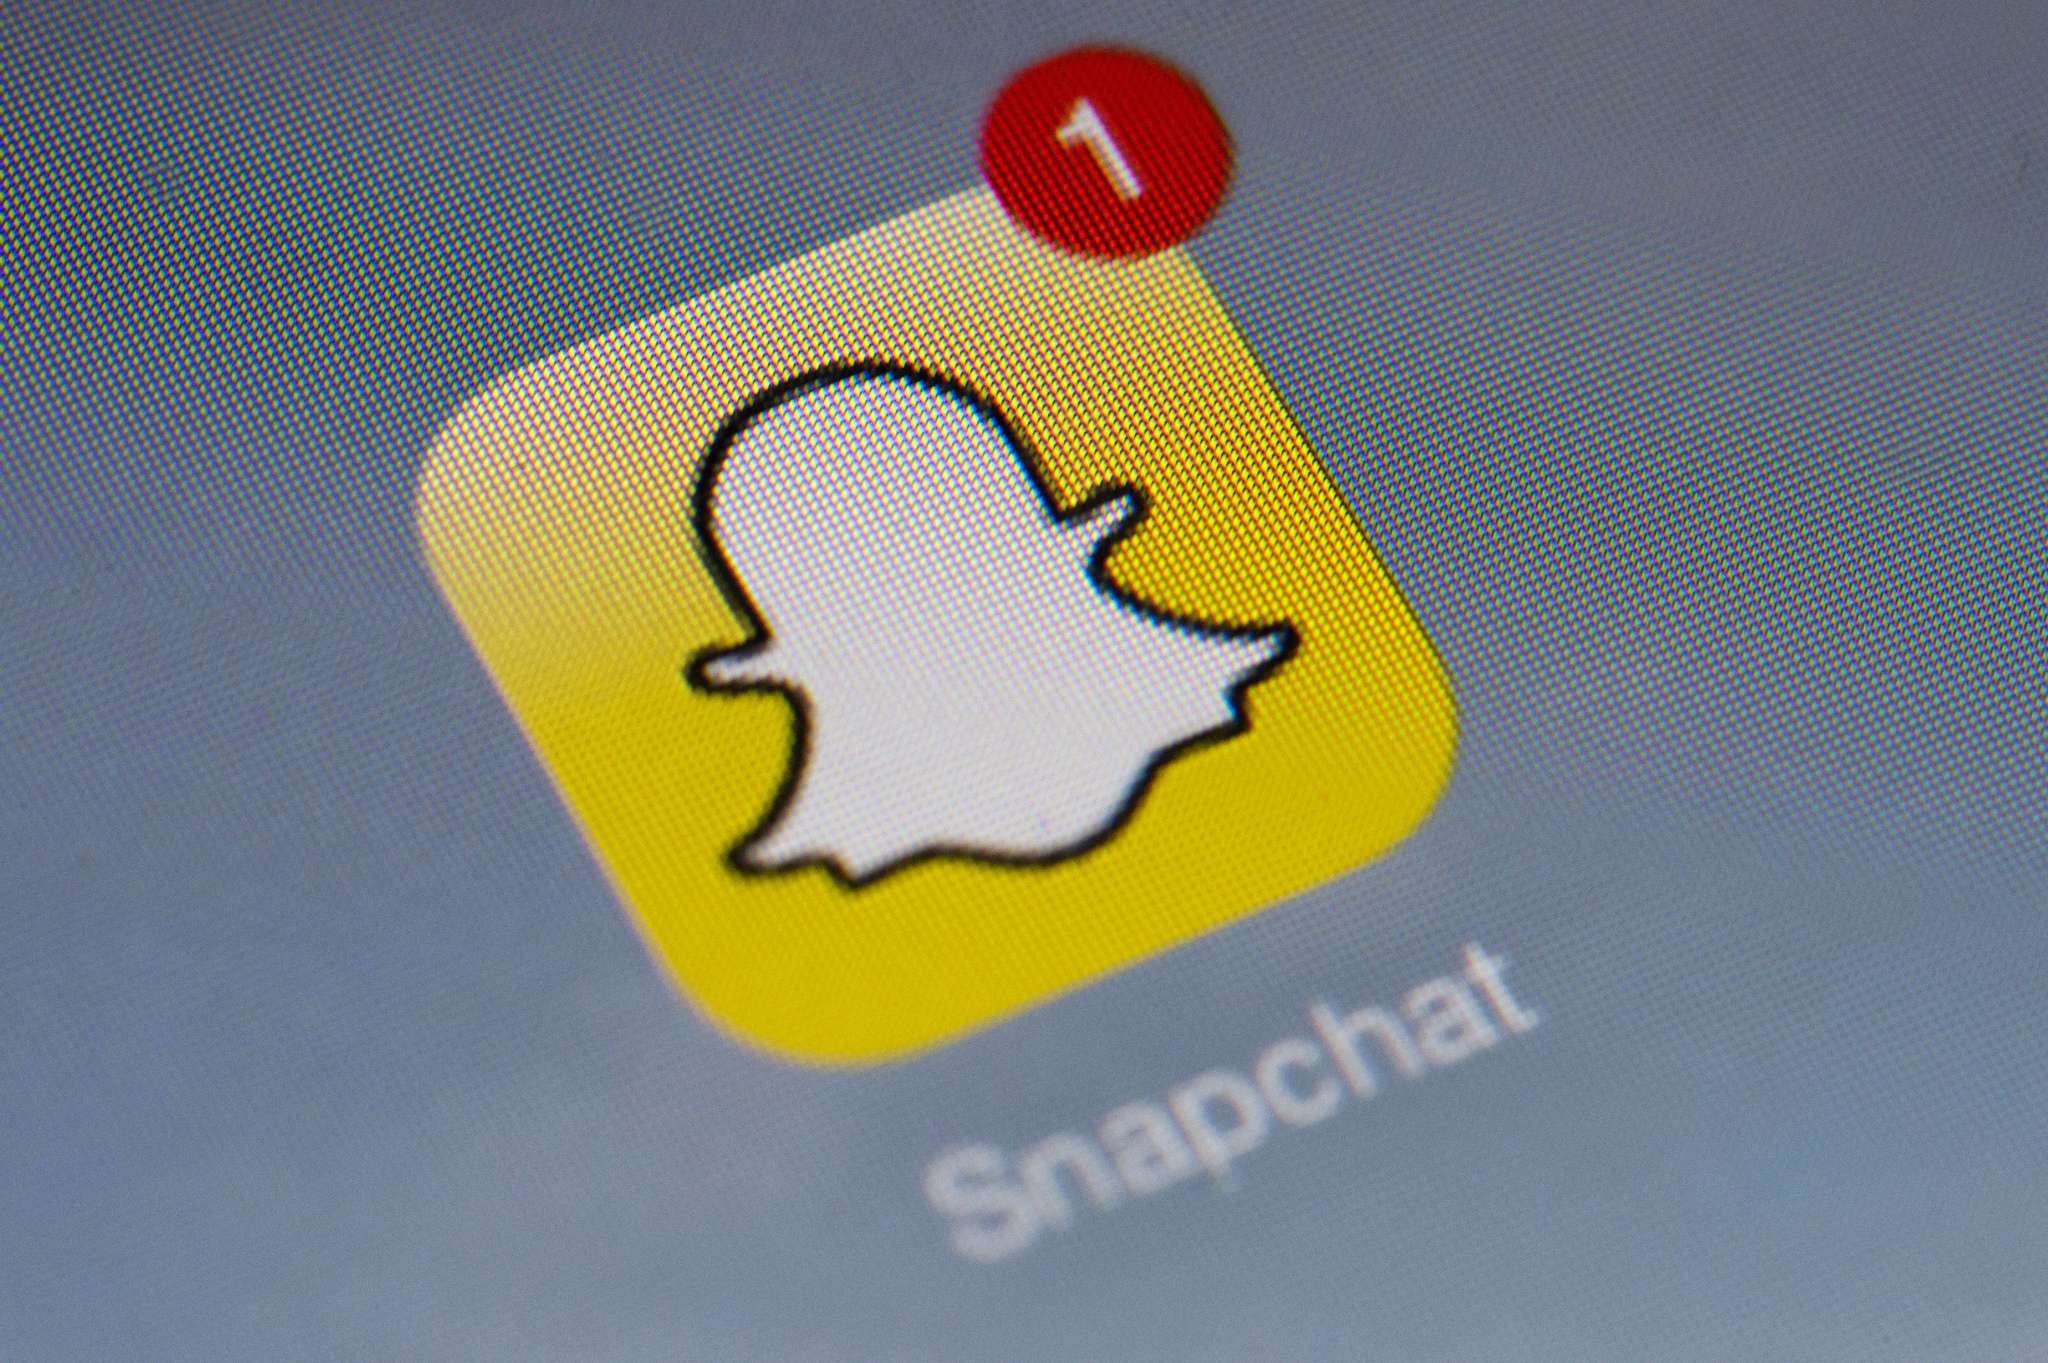 adam purdon recommends view leaked snapchat photos pic